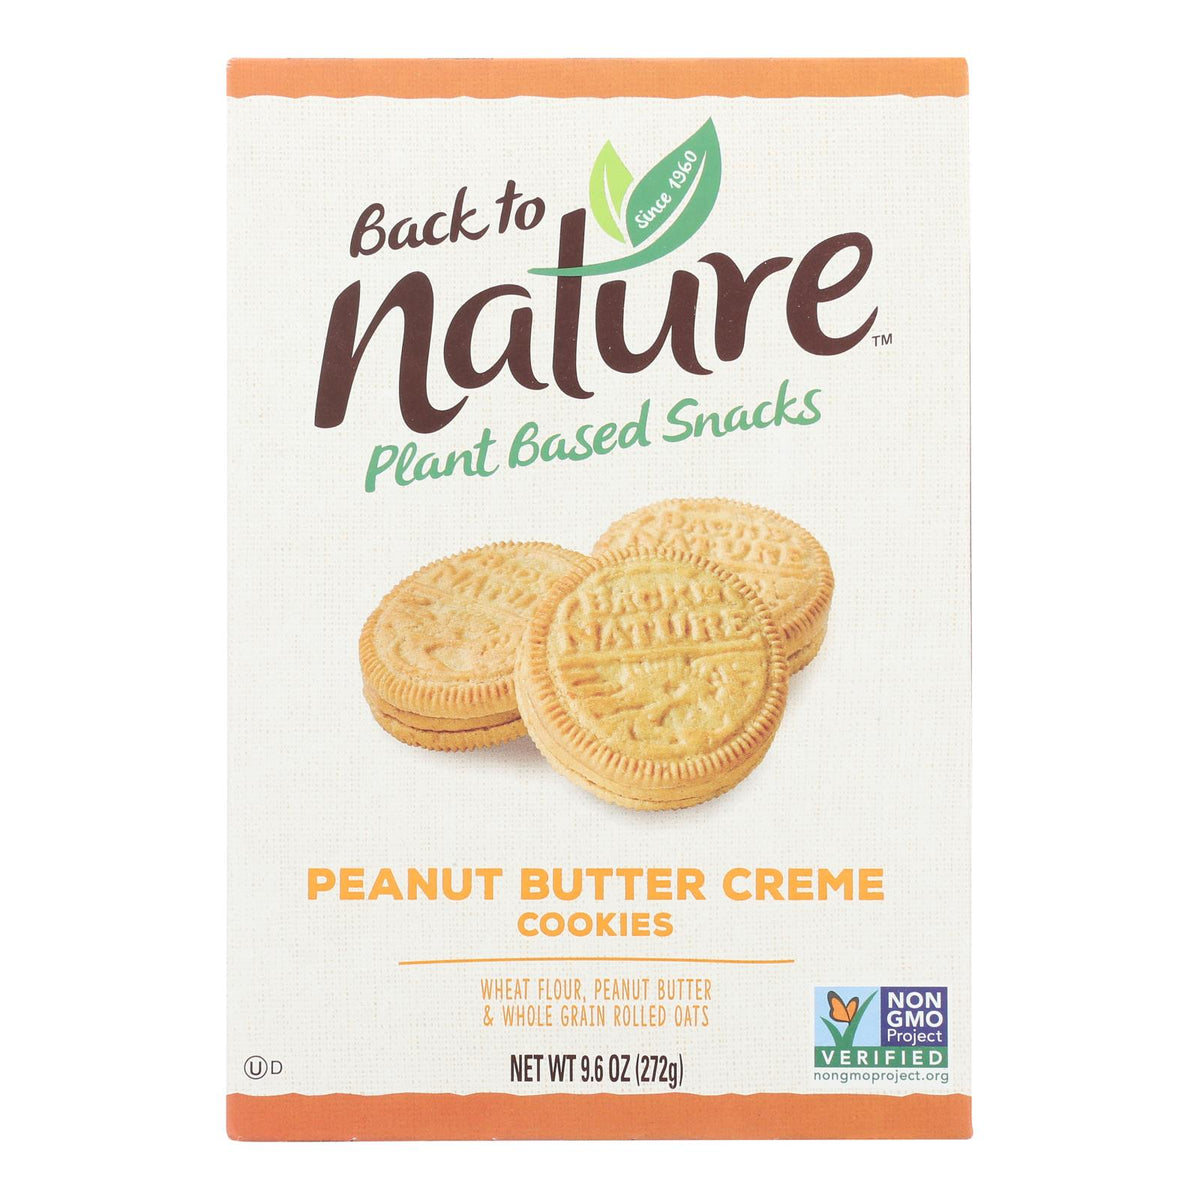 Back To Nature Creme Cookies - Peanut Butter - Case Of 6 - 9.6 Oz.